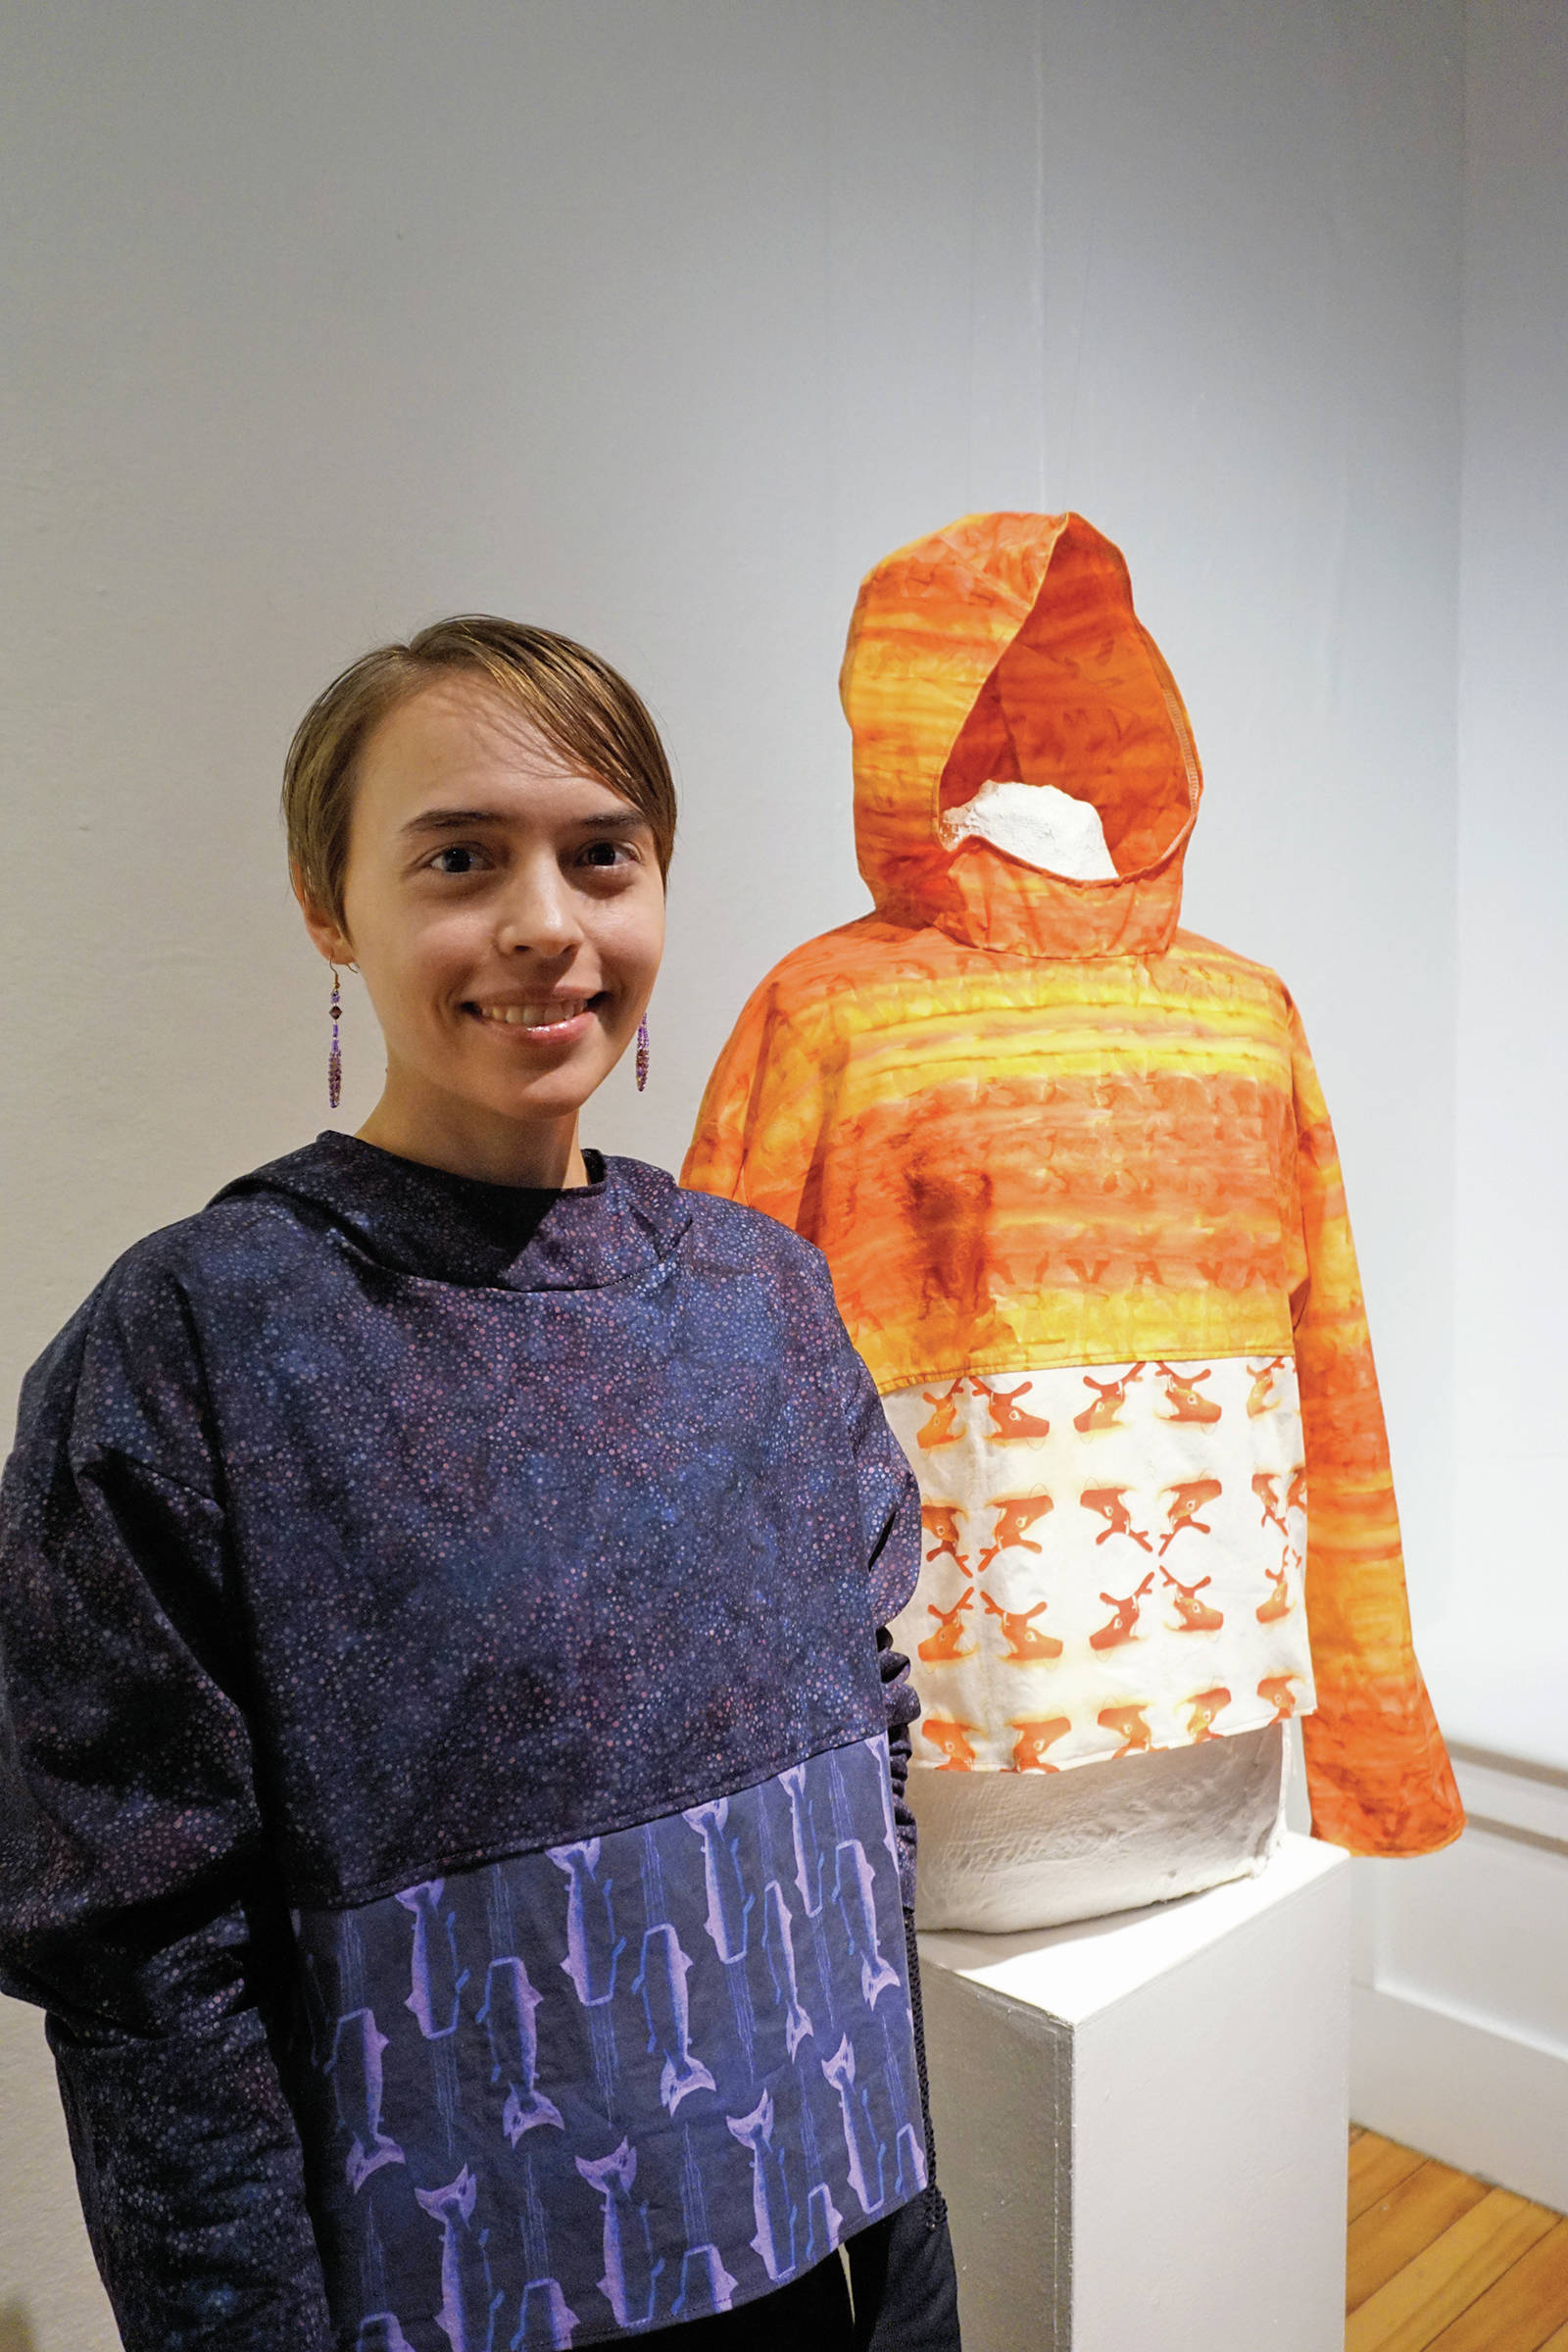 Erin Gingrich stands by her kuspuk at the opening of the “Kuspuk/Qaspeq/Atikluk” show on Oct. 5, 2019, at Bunnell Street Arts Center in Homer, Alaska. Her work includes printed fabric using designs from her sculptures. (Photo by Michael Armstrong/Homer News)